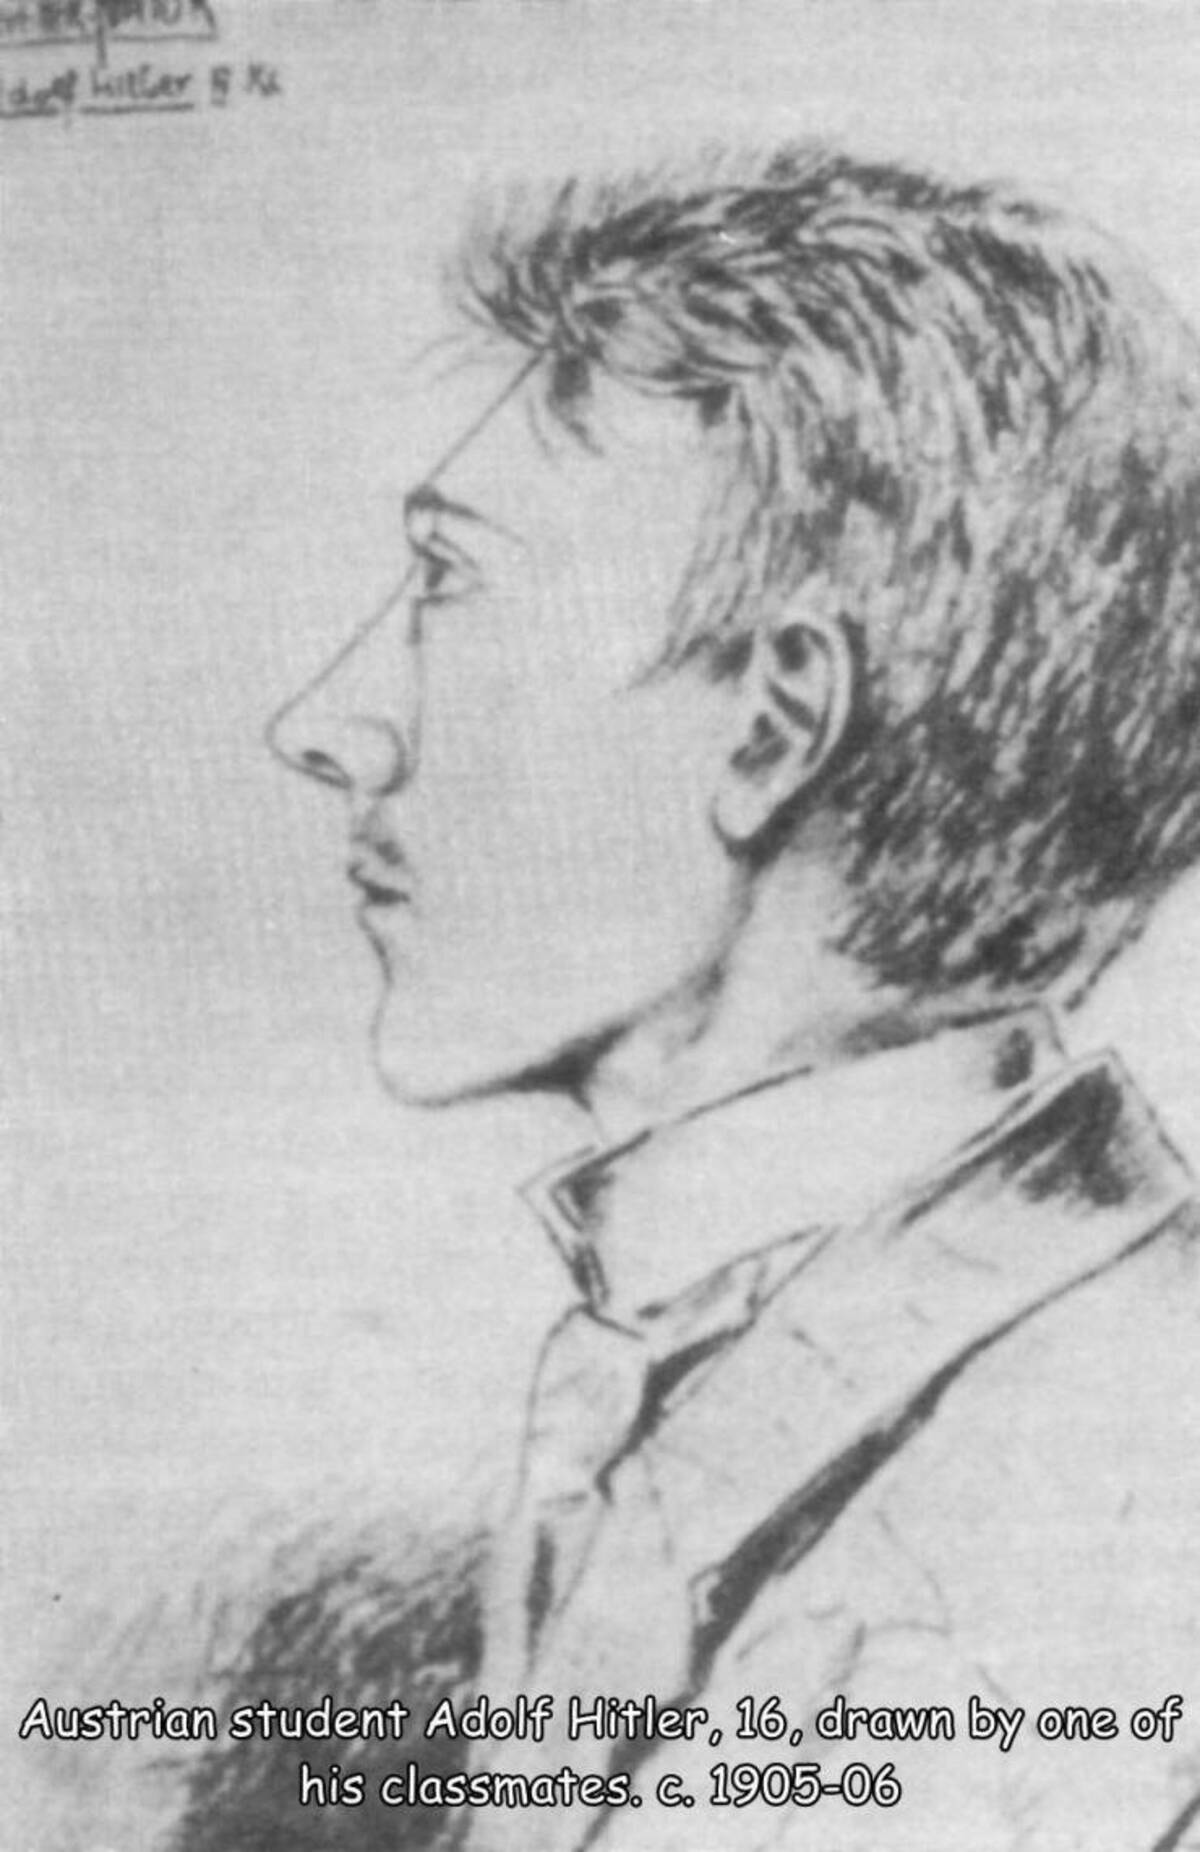 drawing of young hitler - Litter & K Austrian student Adolf Hitler, 16, drawn by one of his classmates. c. 190506